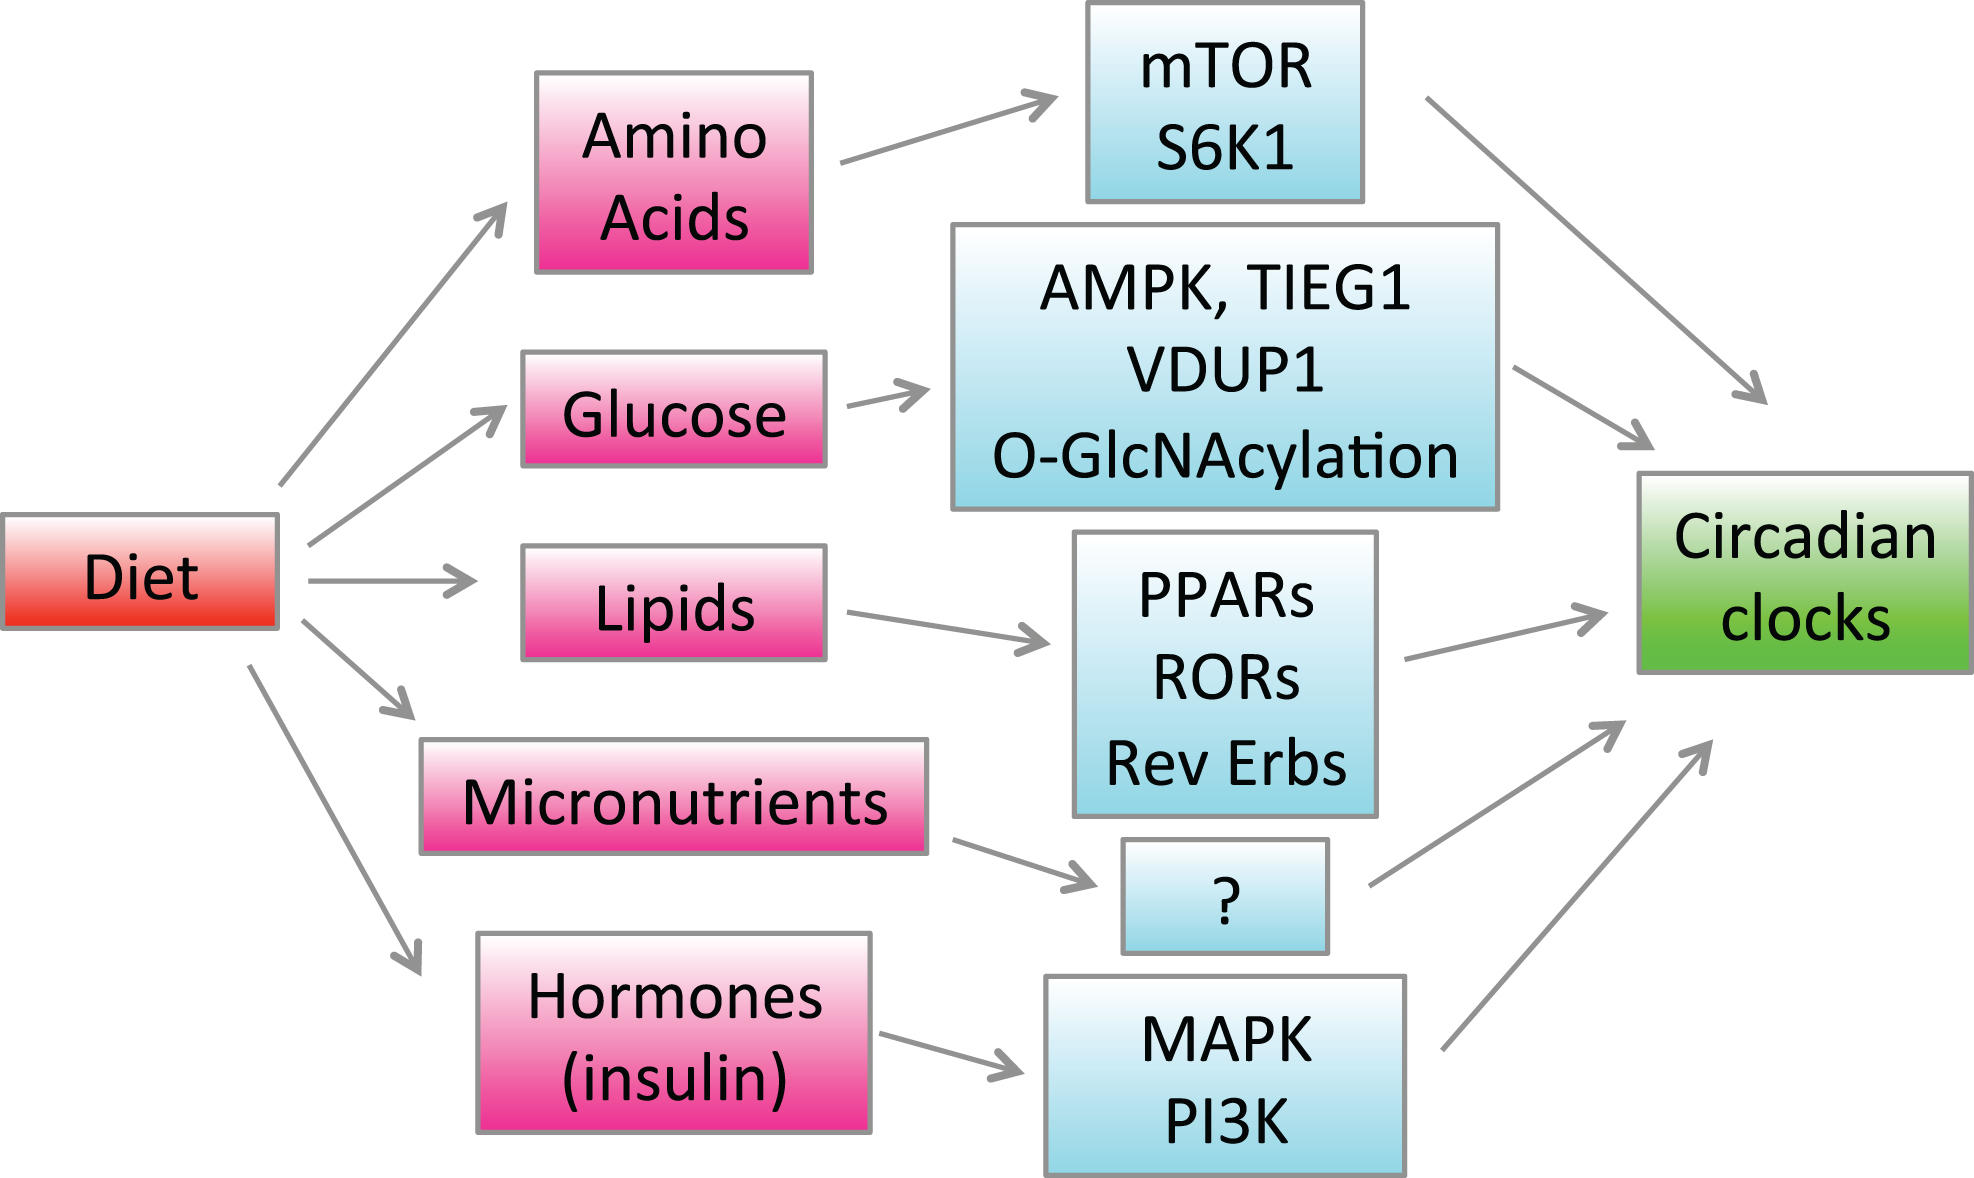 Regulation of the circadian clocks by diet. Feeding causes changes in blood and tissue concentrations of hormones such as insulin and various nutrients such as glucose, lipids and amino acids. Hormones and nutrients activate different signaling pathways and change gene expression through indicated signaling pathways and transcriptional factors, which in turn affects the circadian clocks in the brain and peripheral tissues.